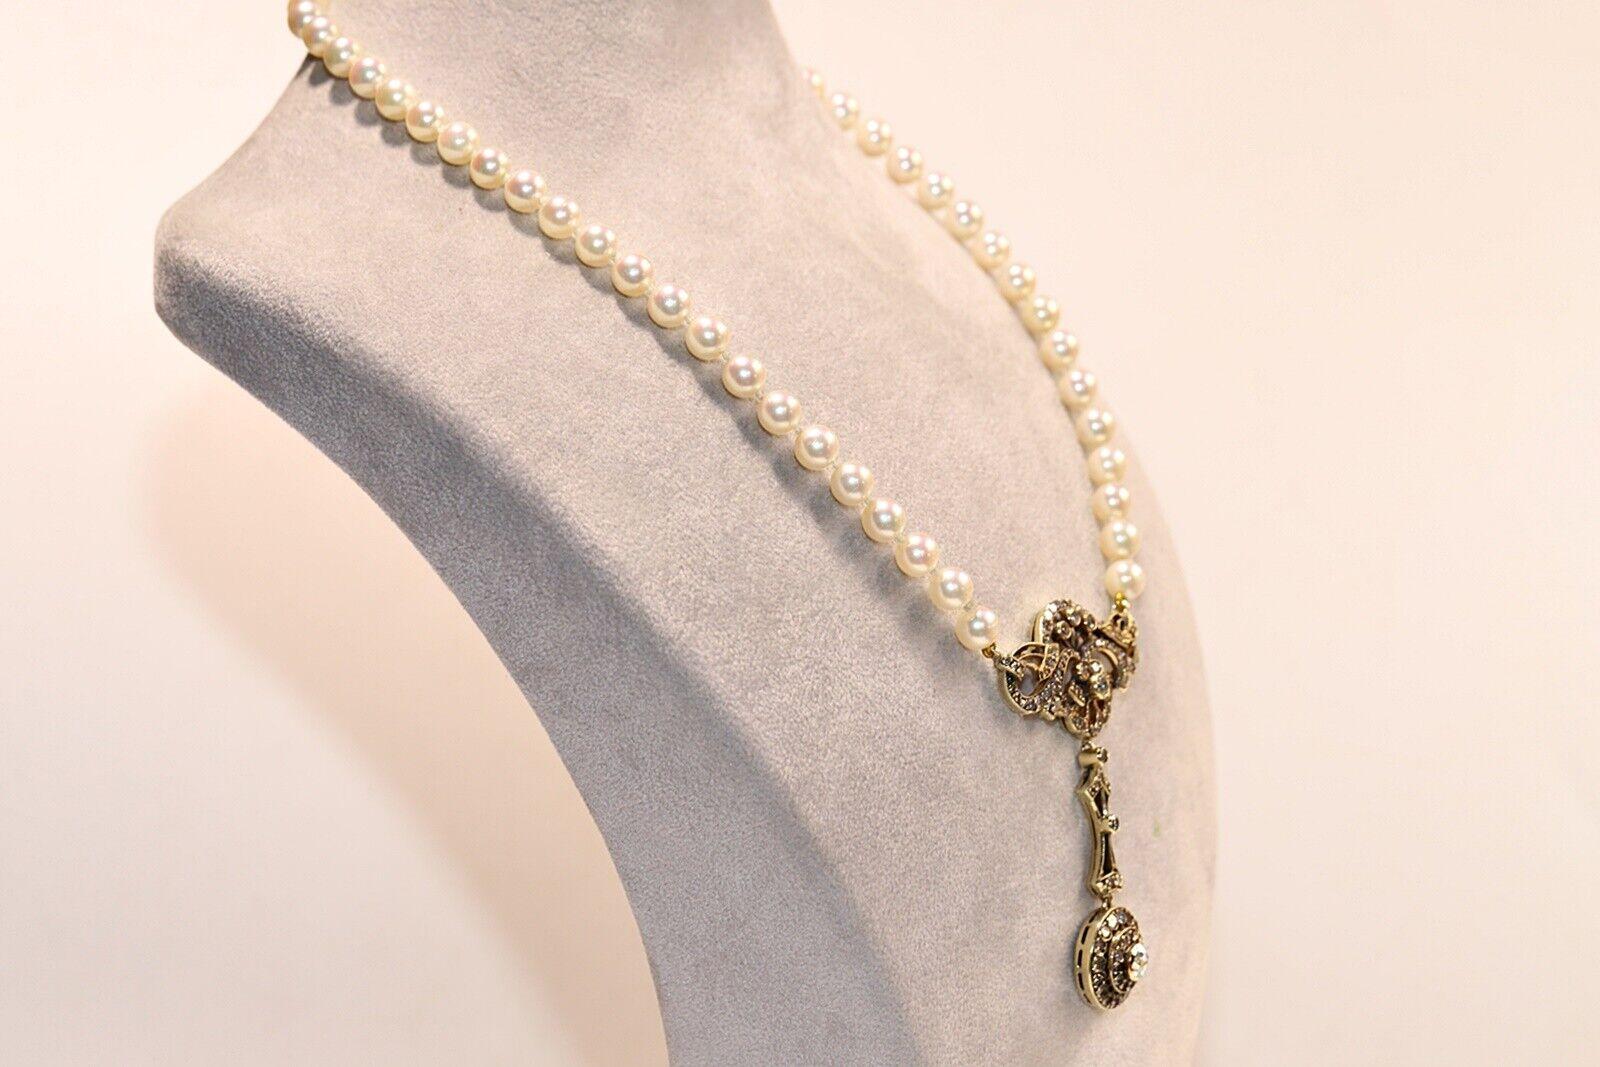 Brilliant Cut Vintage Circa 1960s 14k Gold Natural Diamond And Pearl Necklace For Sale